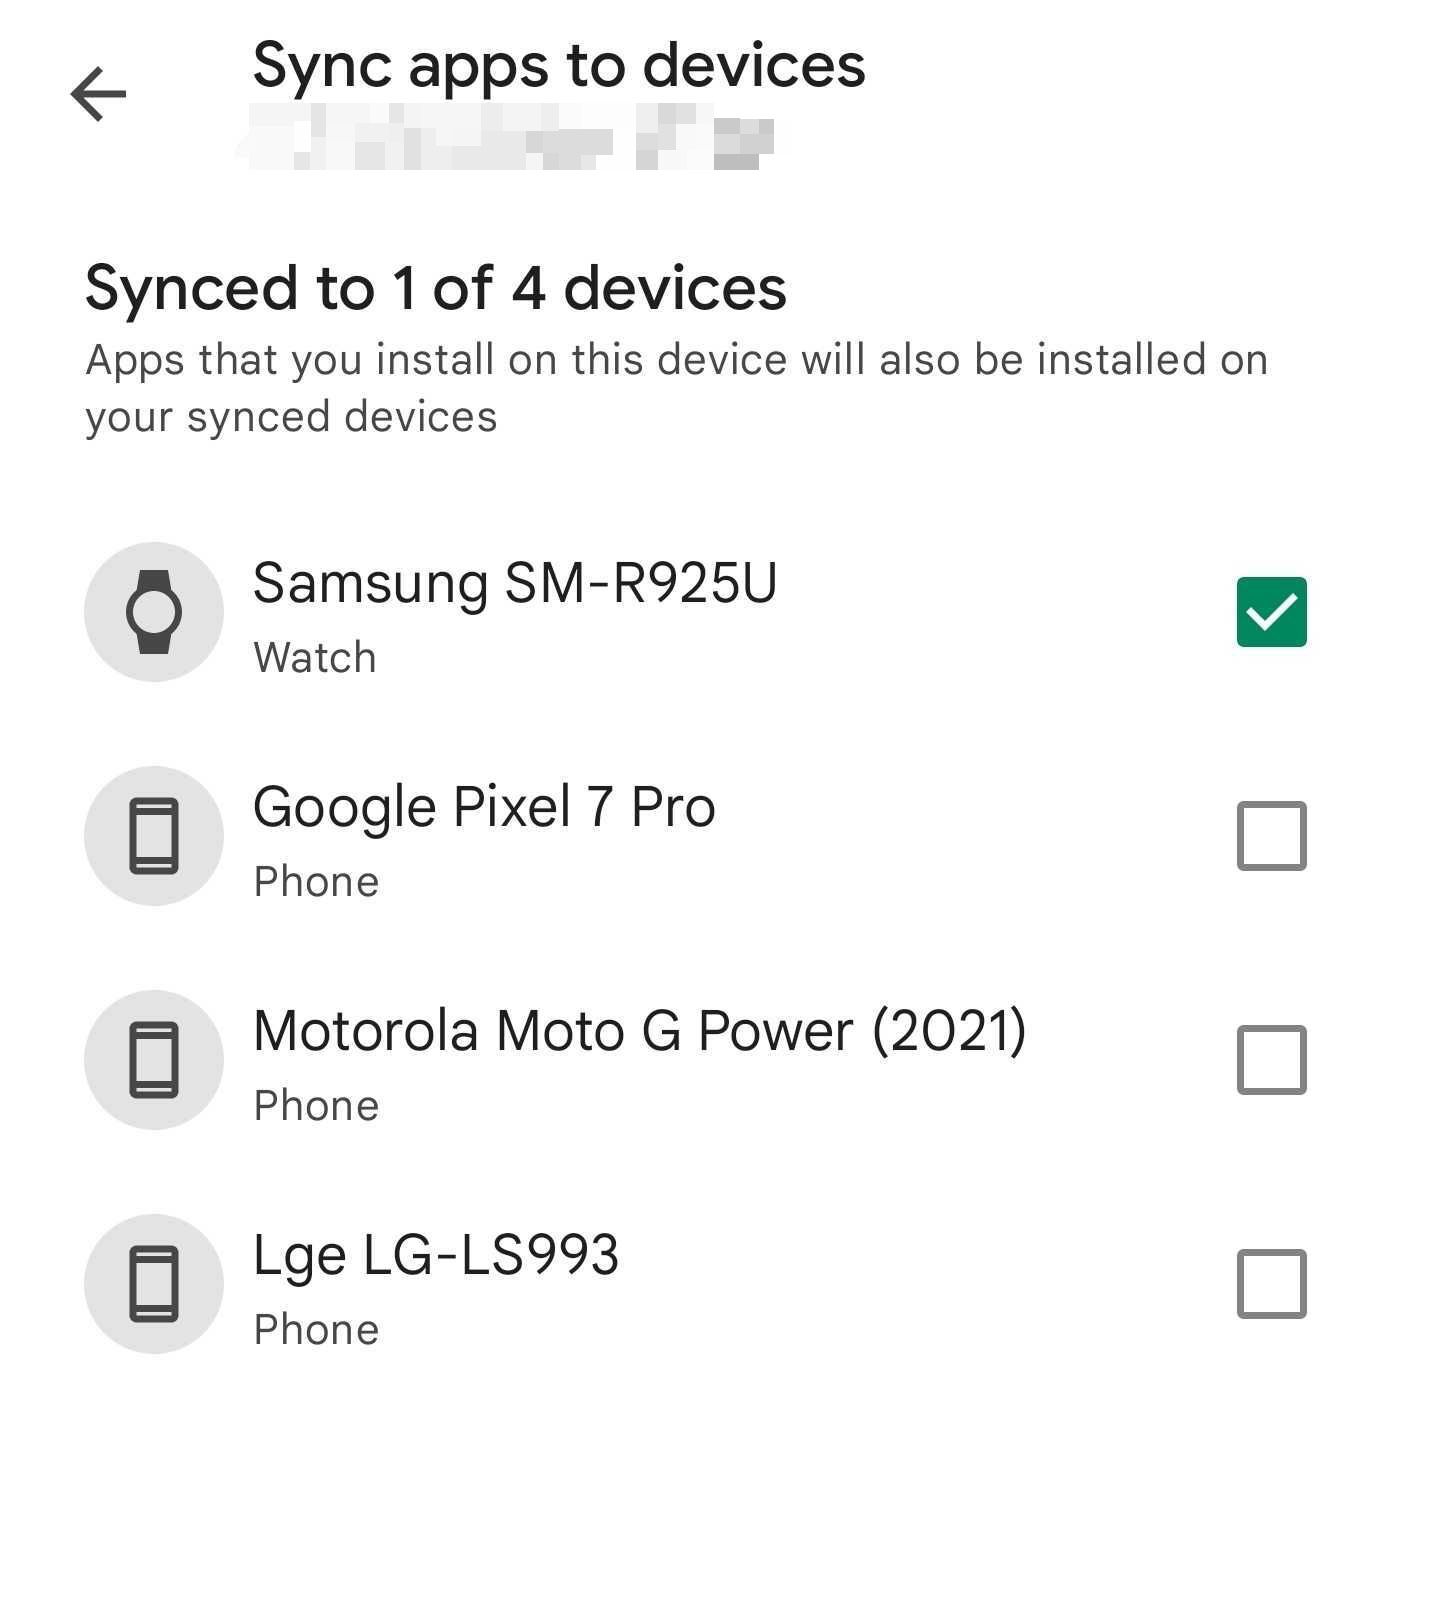 play-store-sync-apps-to-devices-2